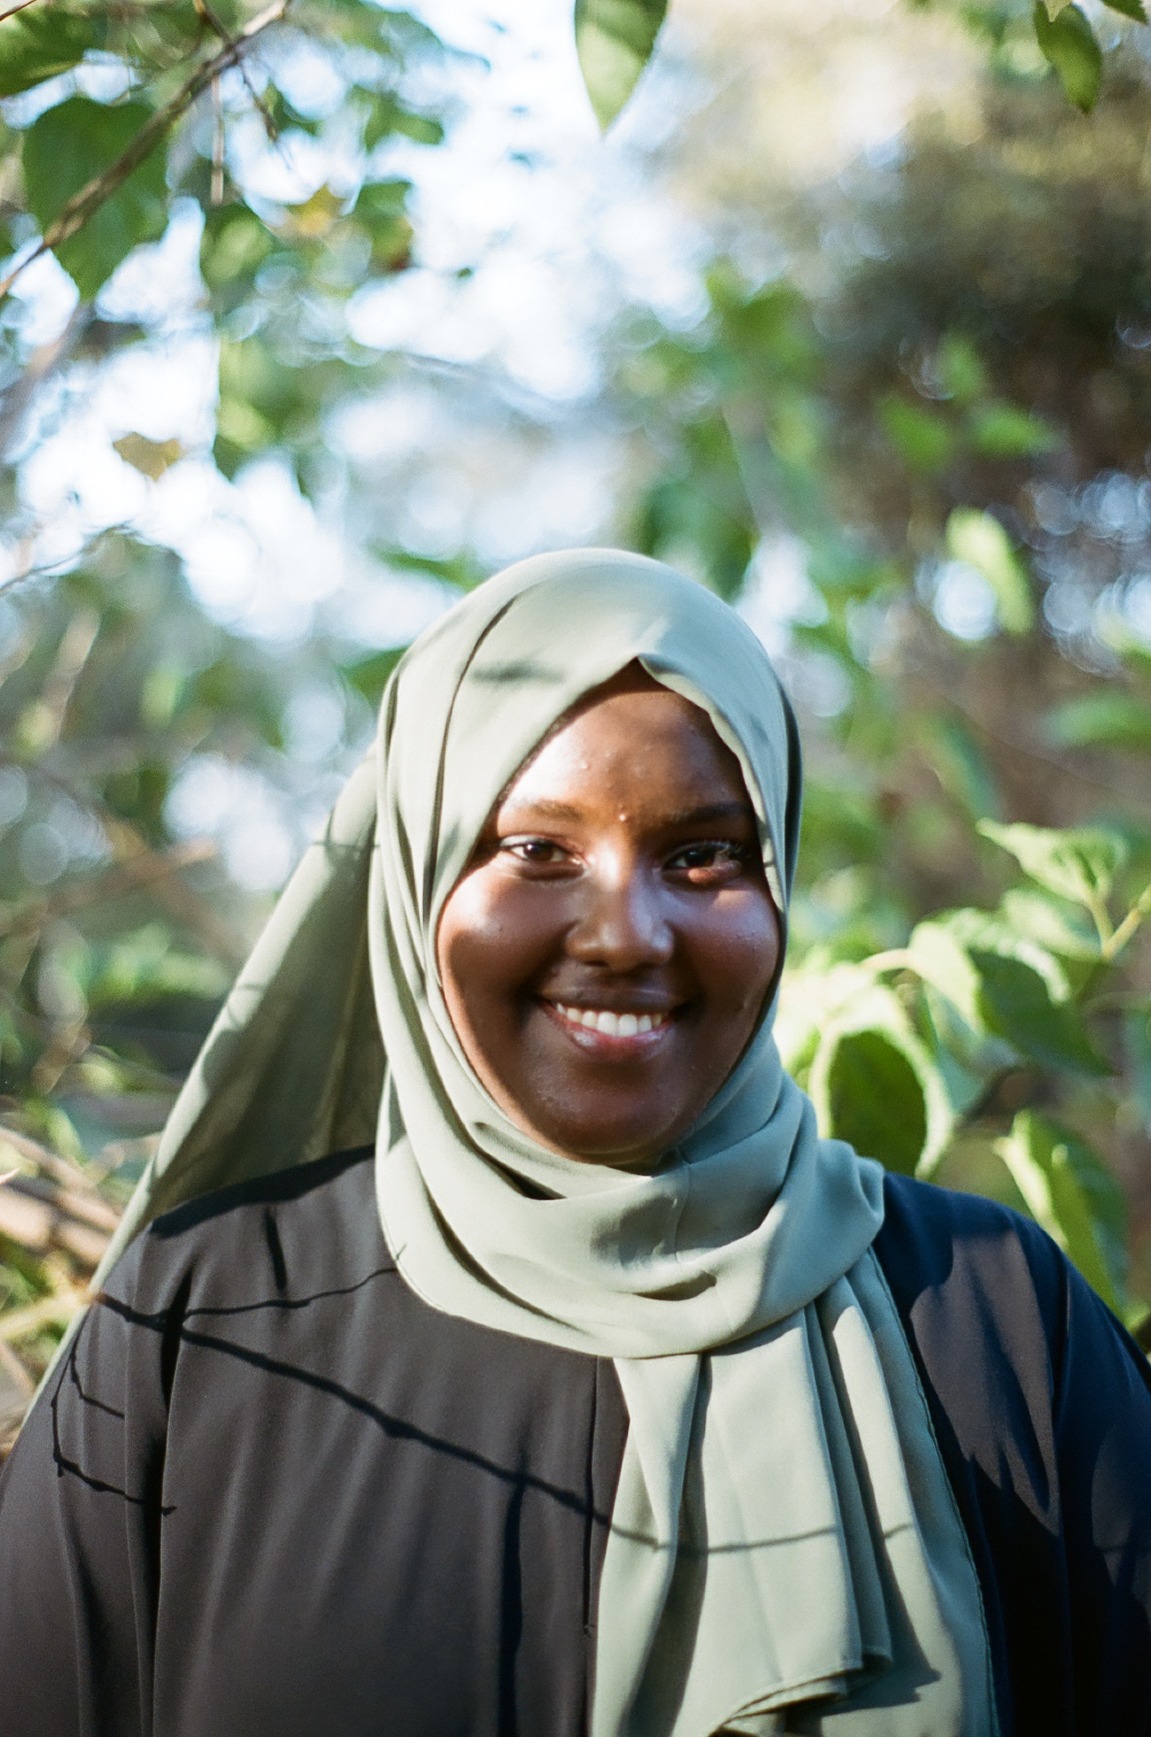 Photo portrait of young African woman smiling with an olive green head scard and black blouse.